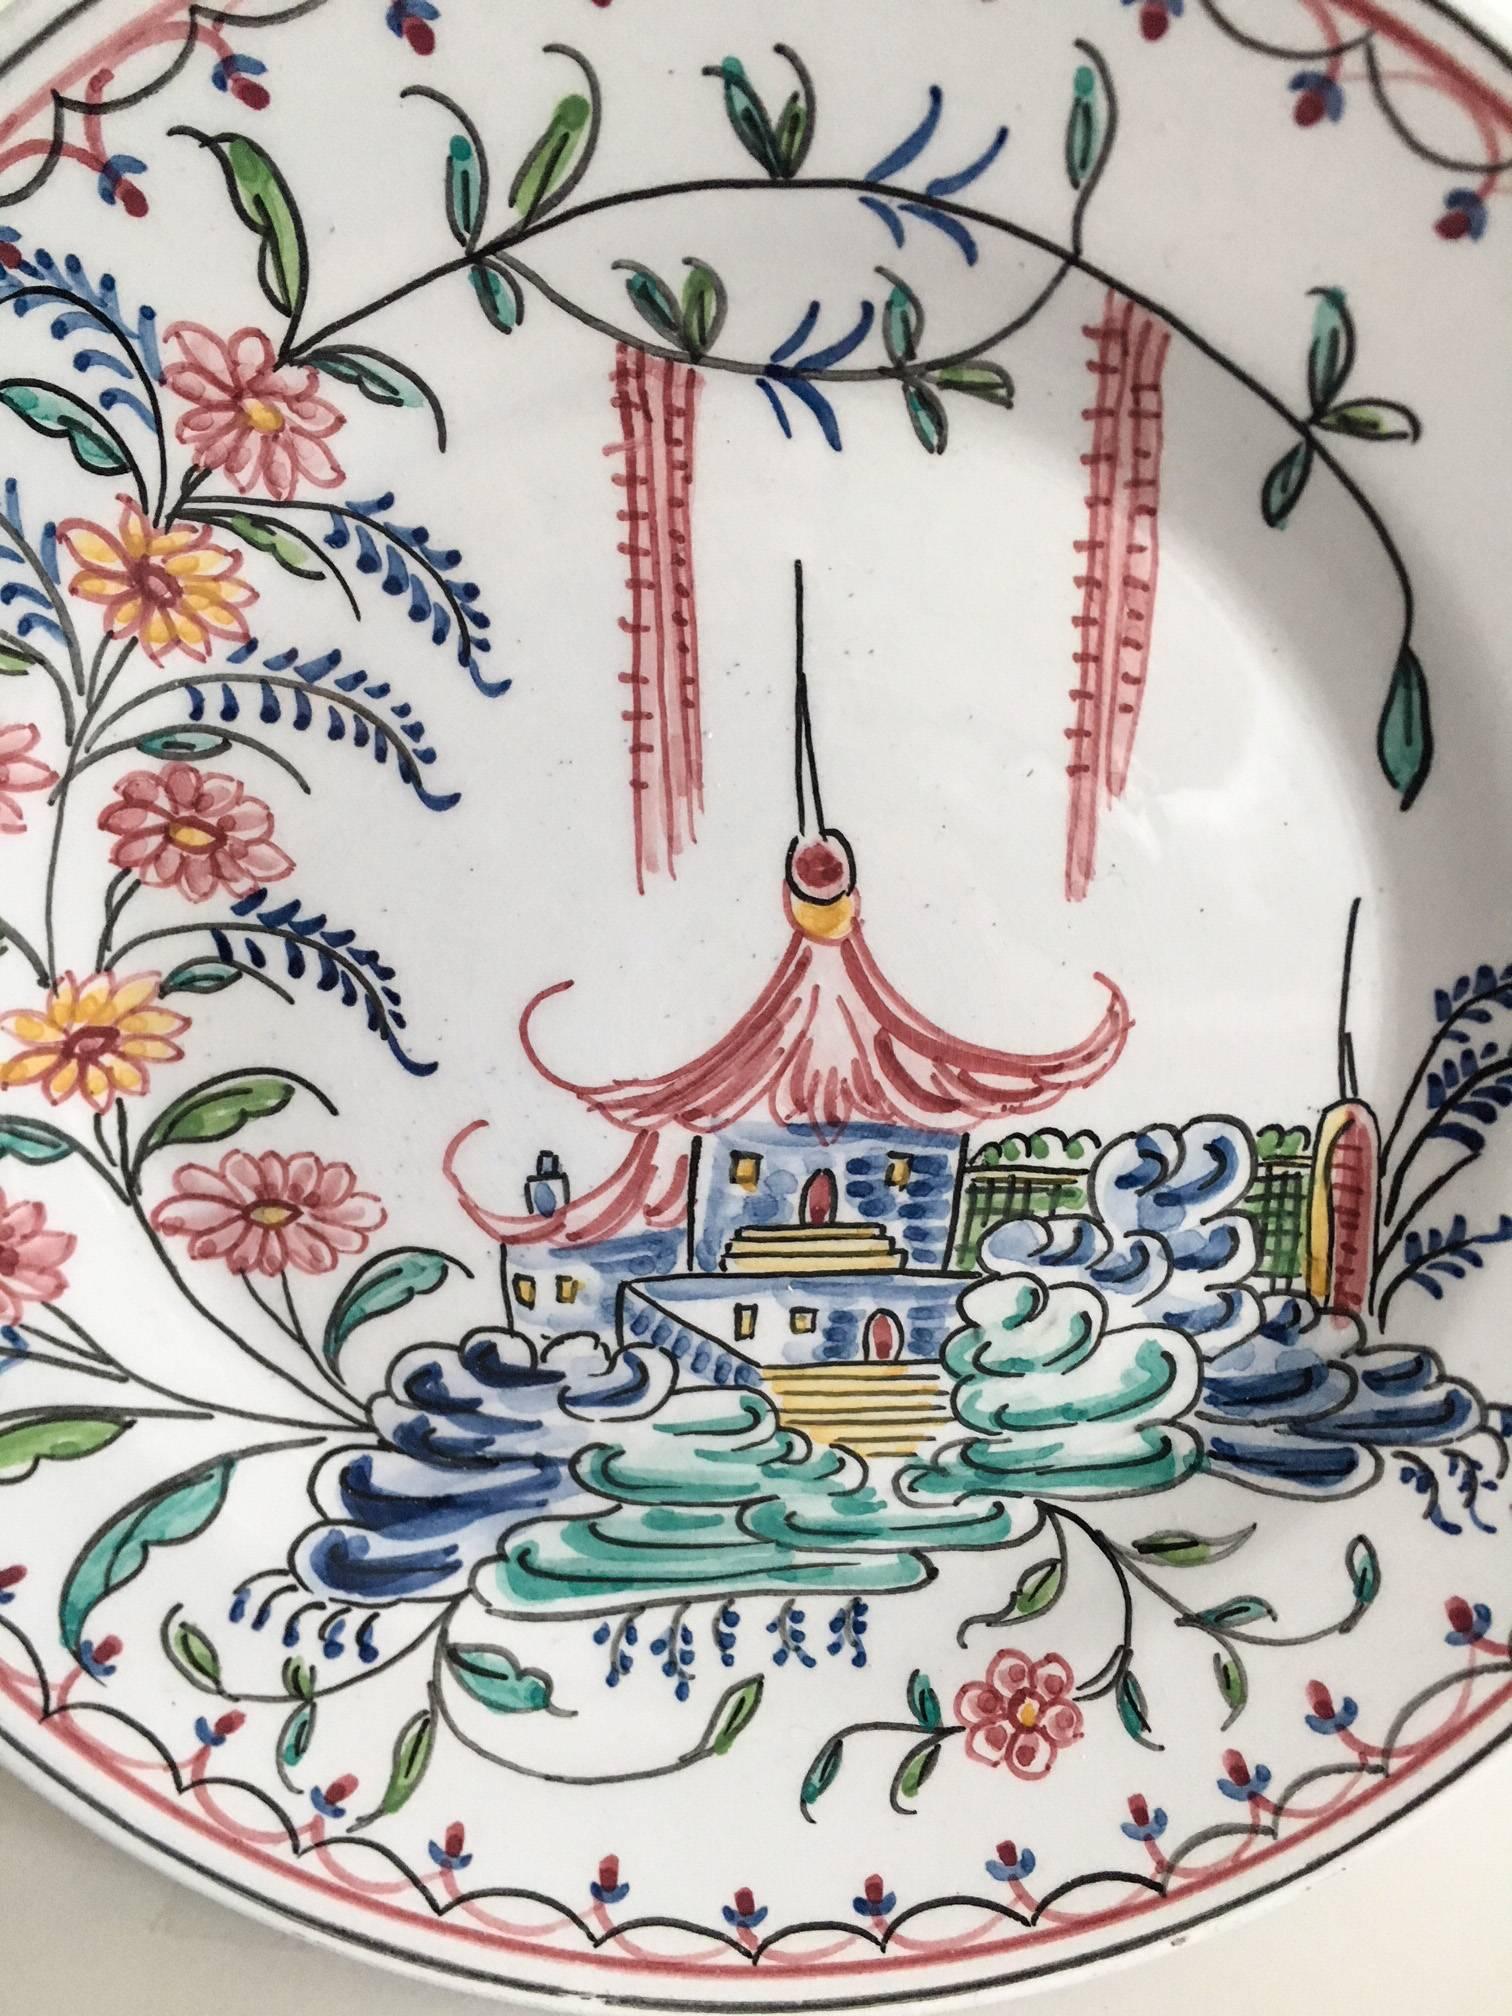 Delicately painted stoneware plate made by Mottahedeh depicting a pagoda ensconced in traditional Chinoiserie flowers and clouds. Plate is from the Birmingham Museum of Art in Alabama, circa 1950s-1960s. Original Mottahedeh paper label intact; made